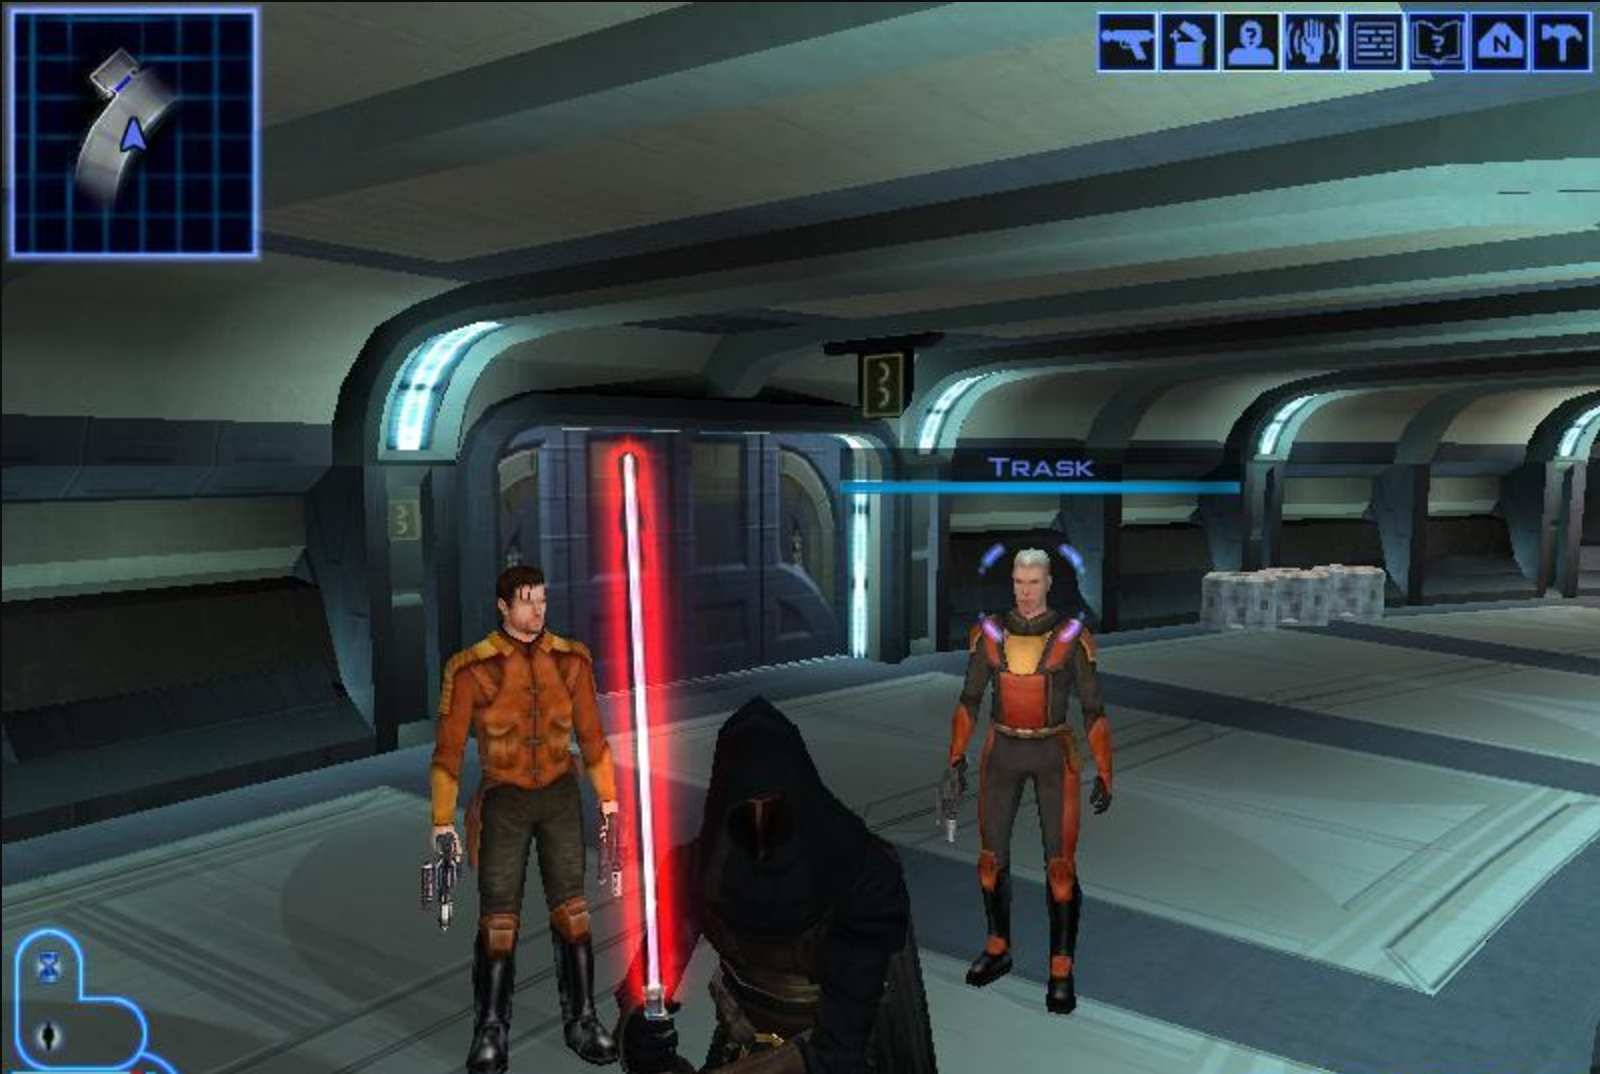 Star wars: knight of the old republic 2 the sith lords. достижения.